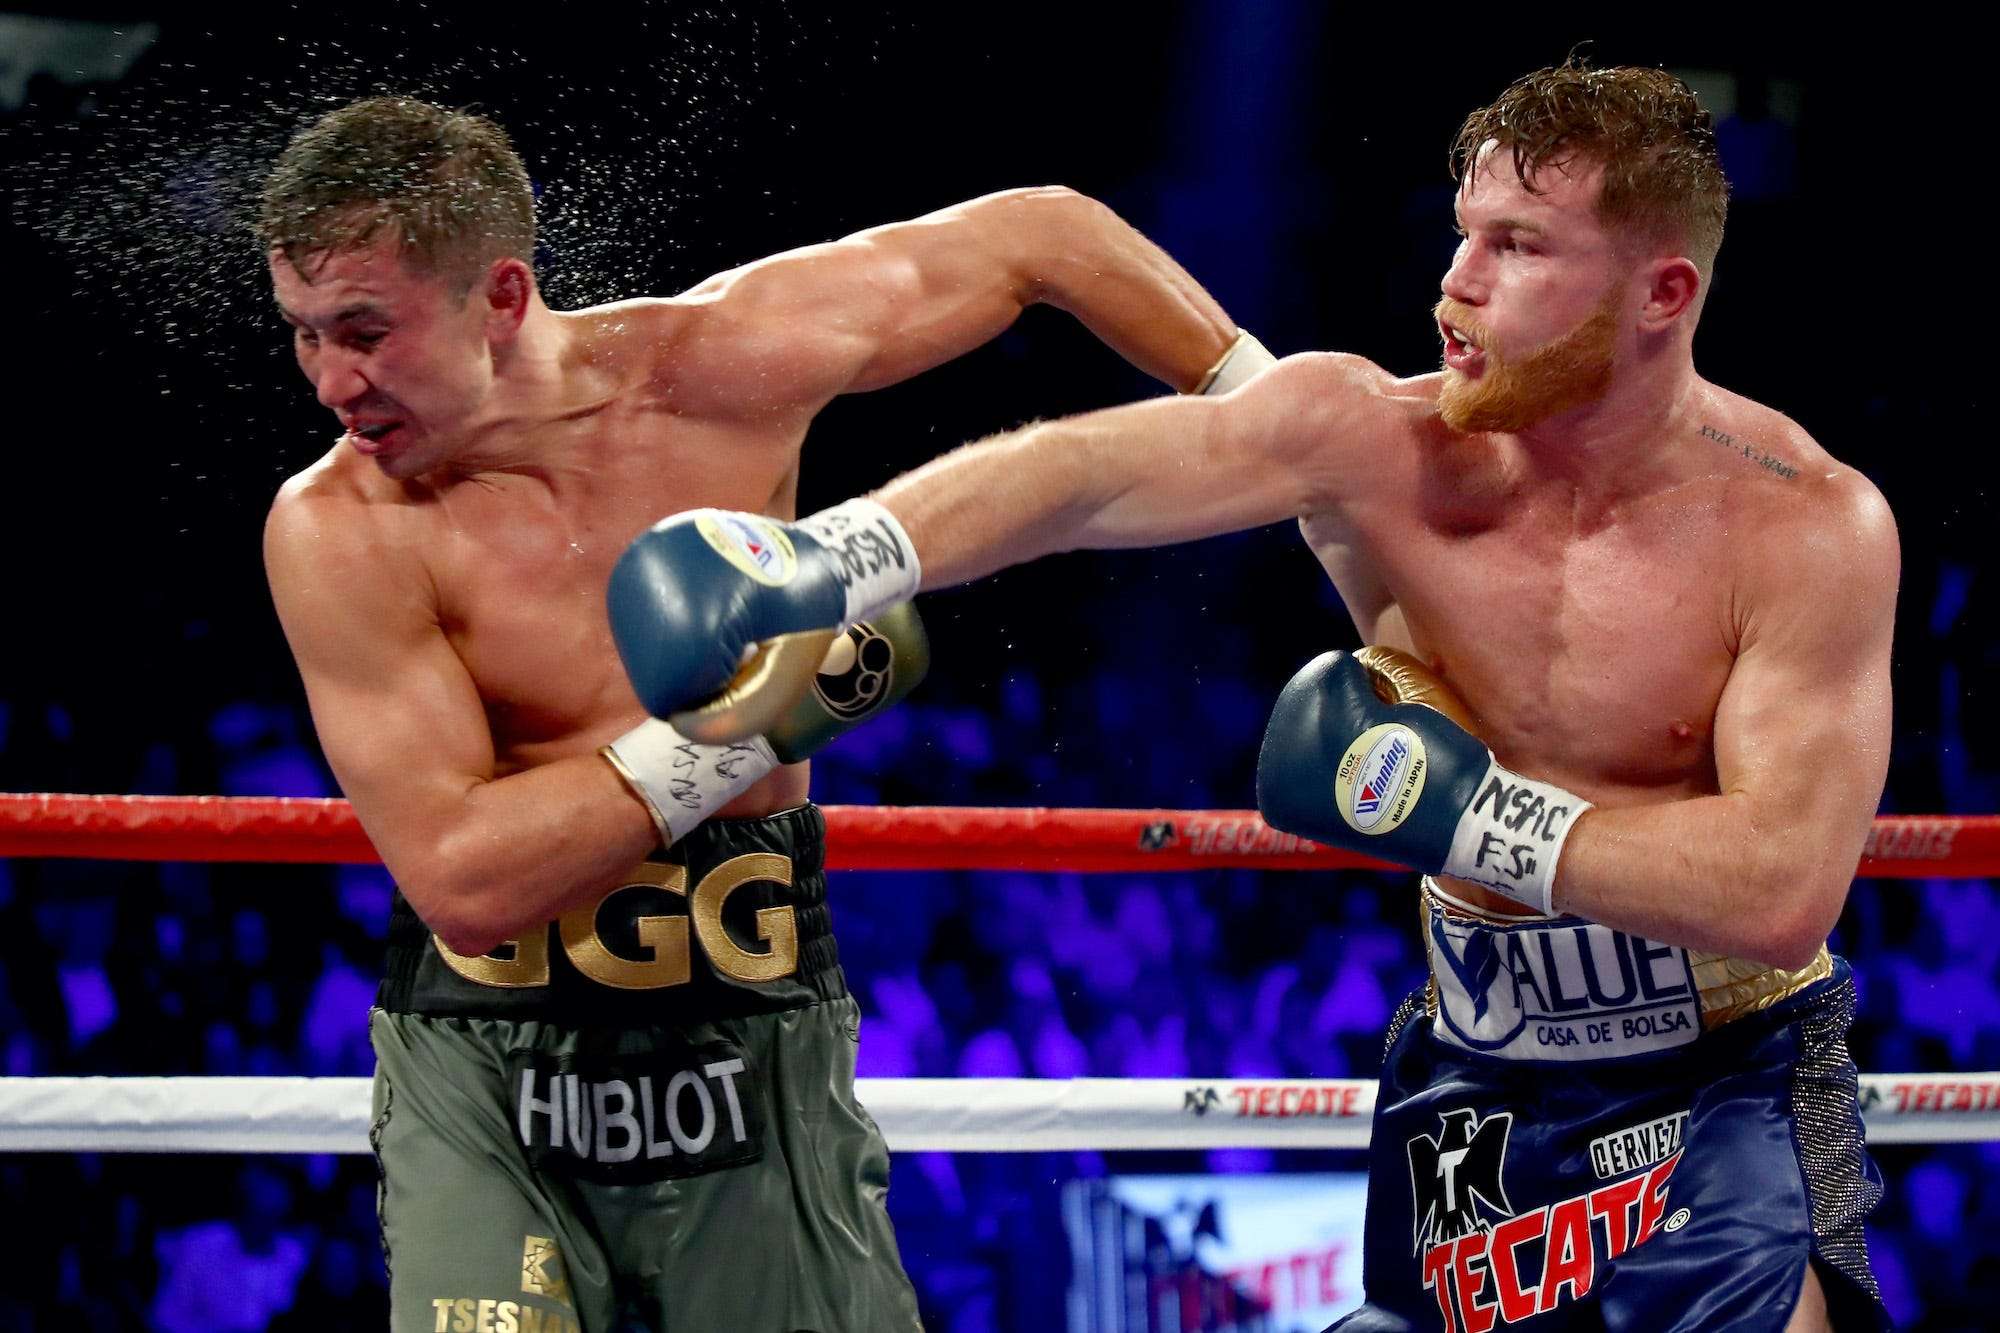 Saul 'Canelo' Alvarez said one of boxing's biggest matches is now